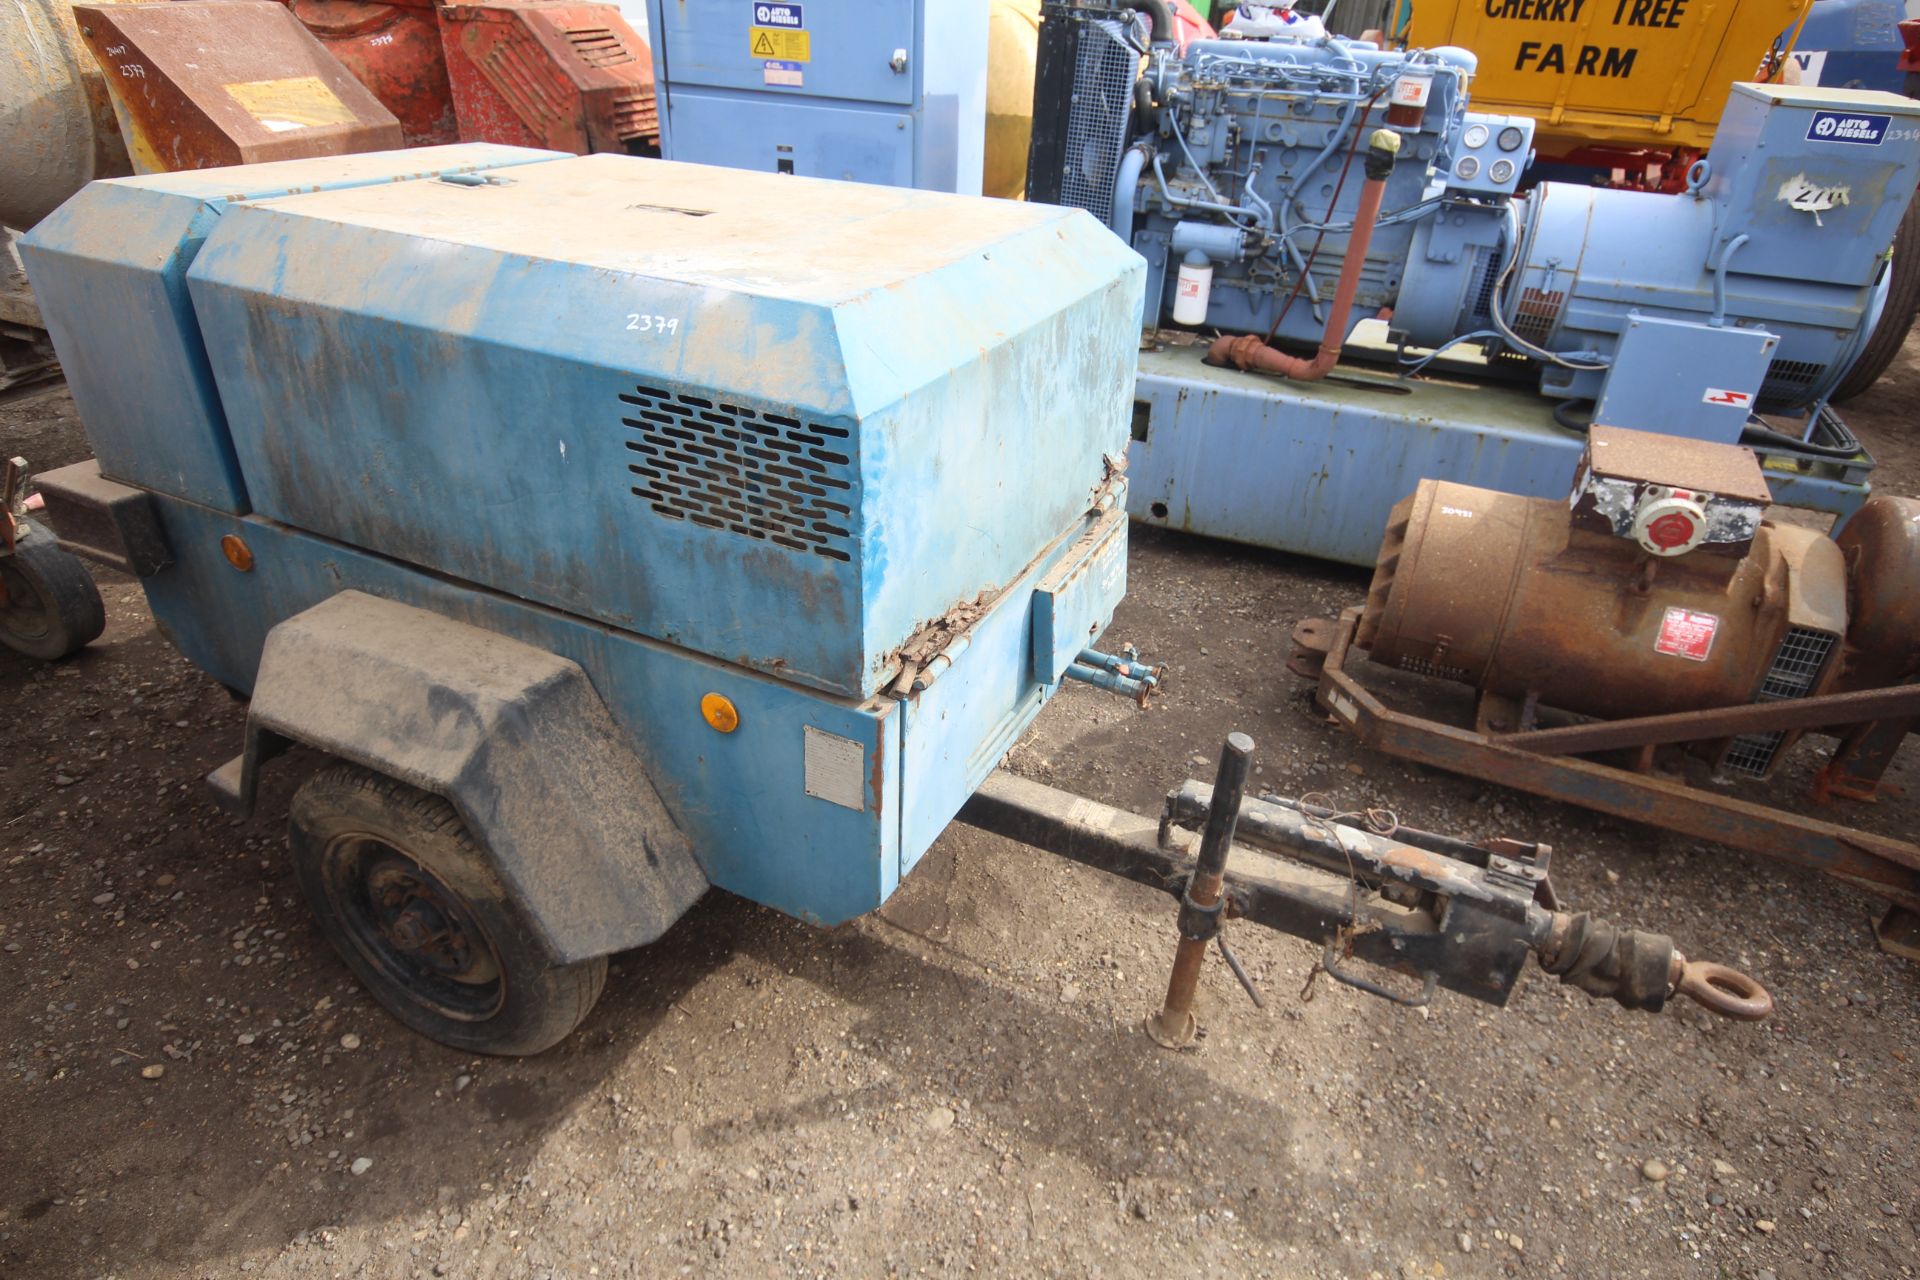 ** Online Video Available ** Lowery road tow compressor. Vendor reports running recently.